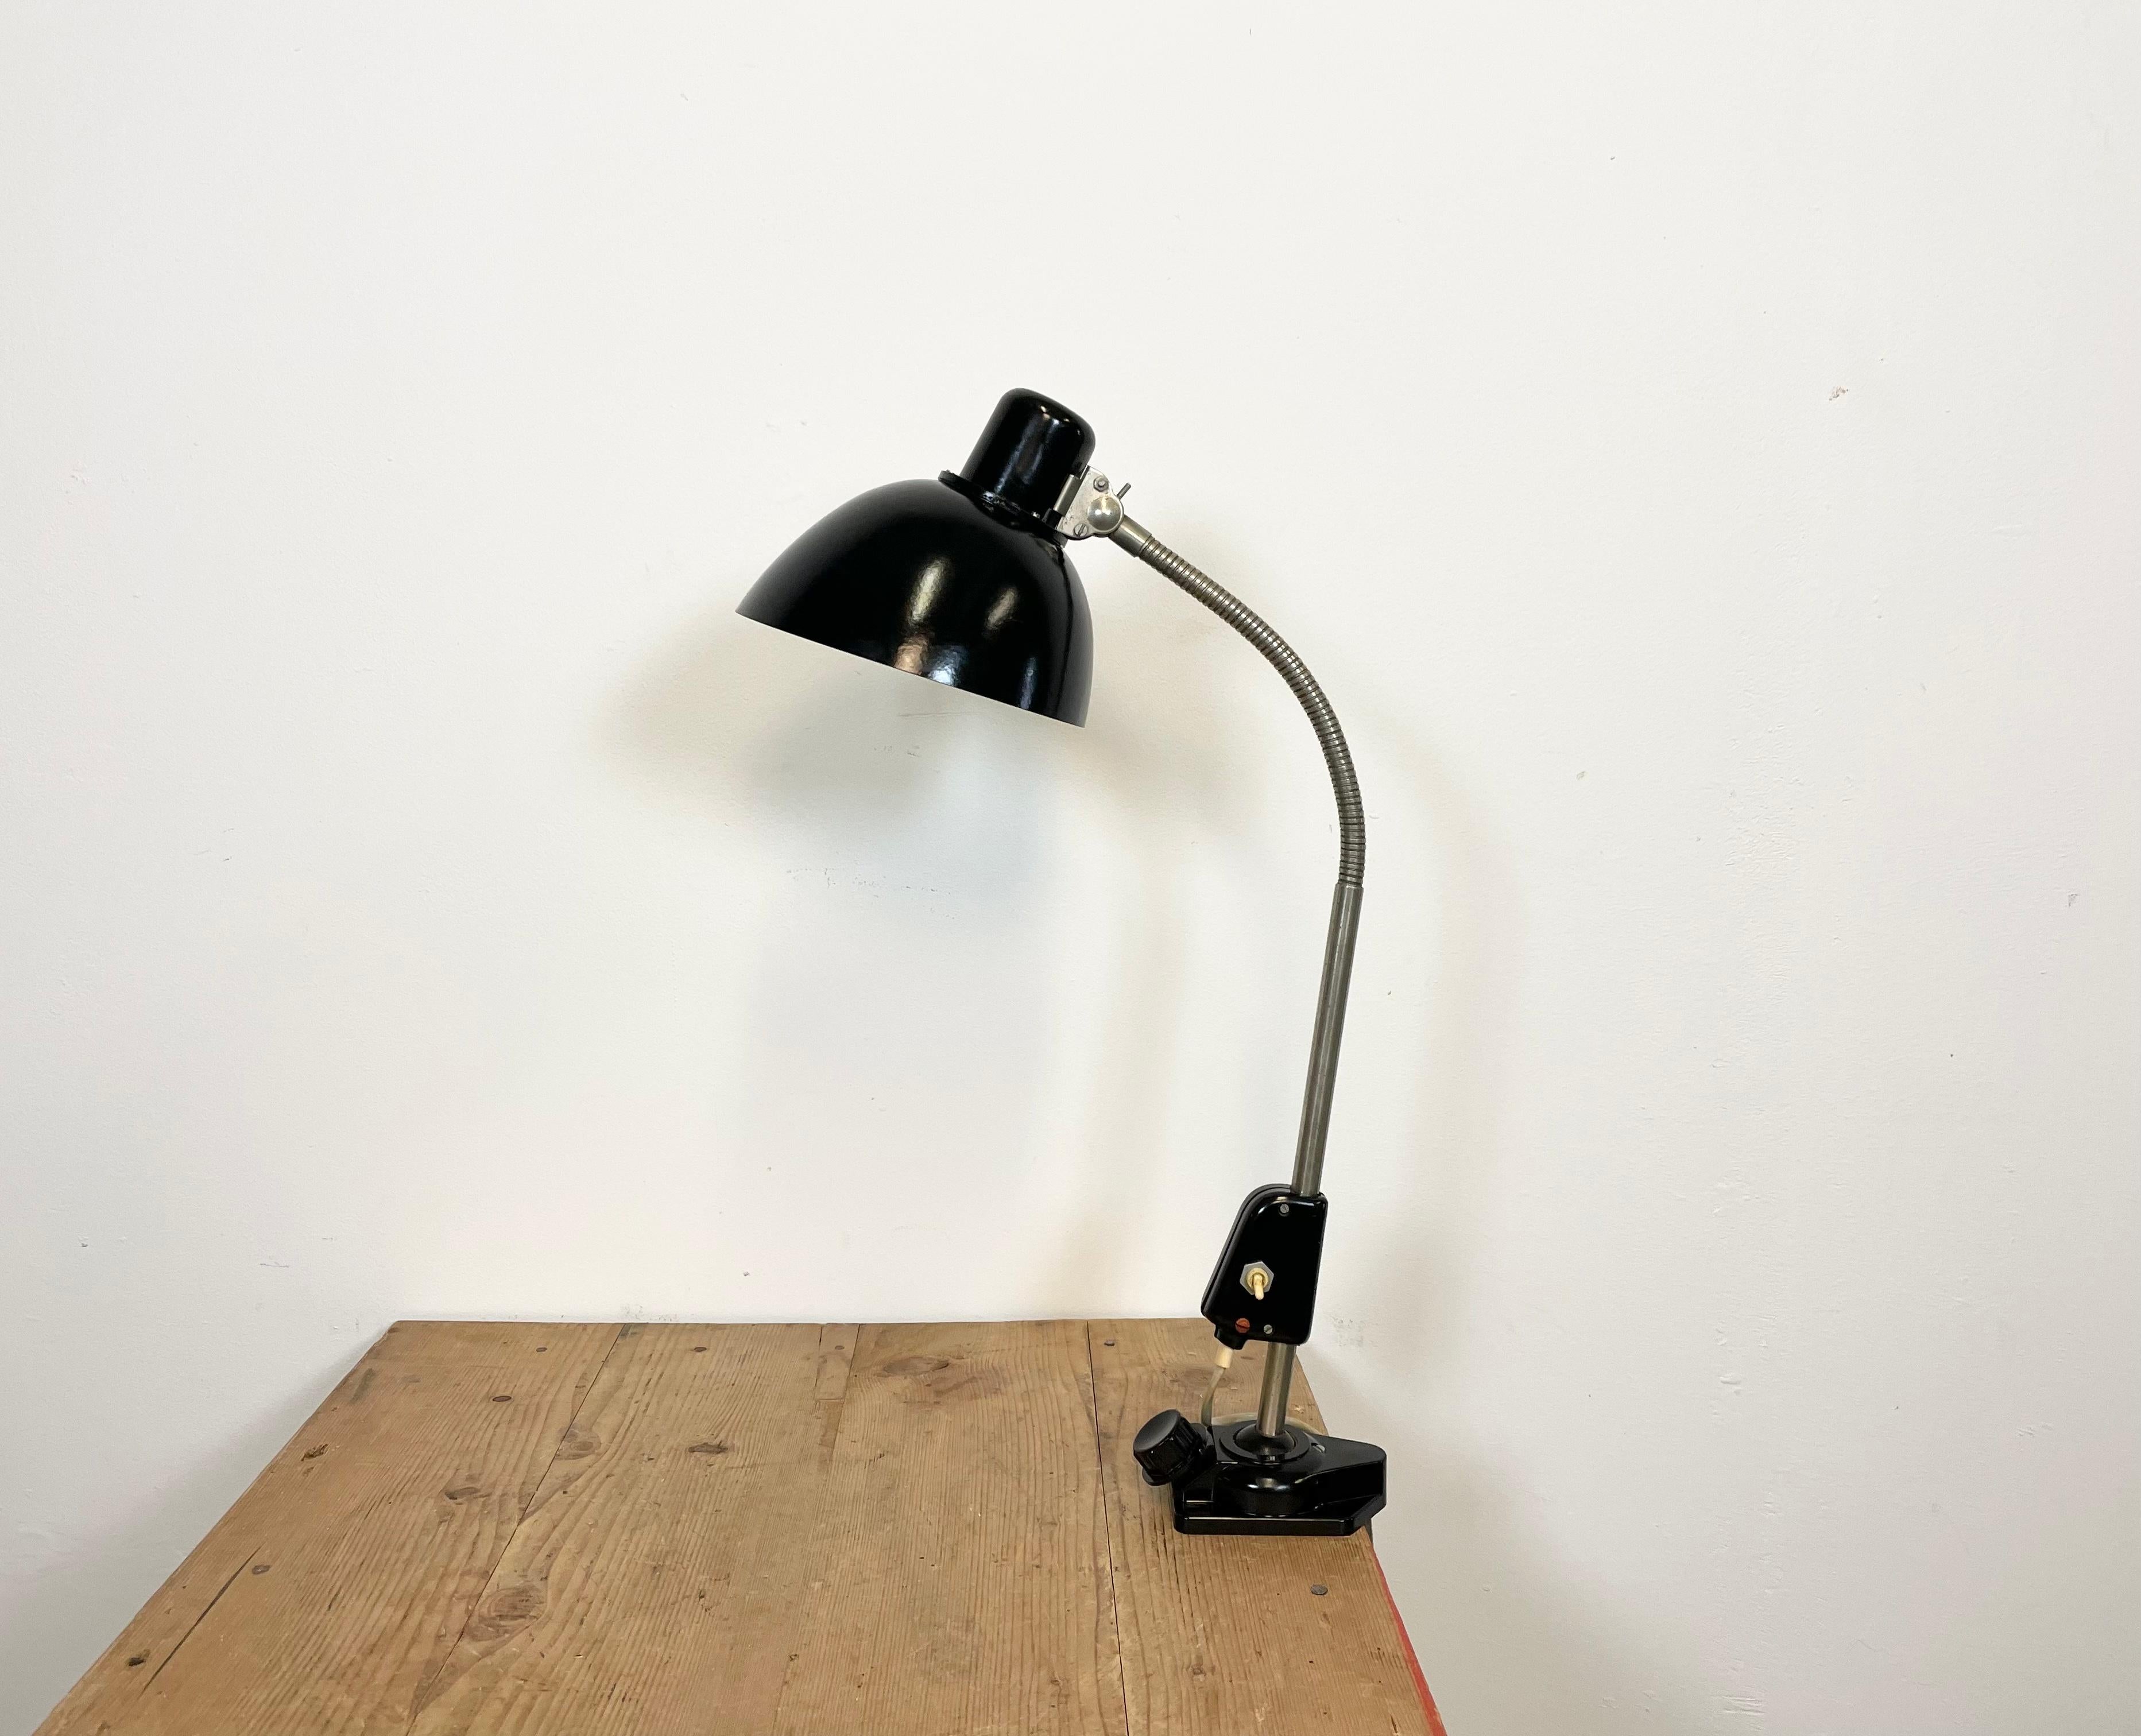 Industrial bakelite flexible gooseneck table lamp made in Germany during the 1950s .Very good vintage condition. The socket requires E 27 light bulbs. The lampshade diameter is 19 cm.